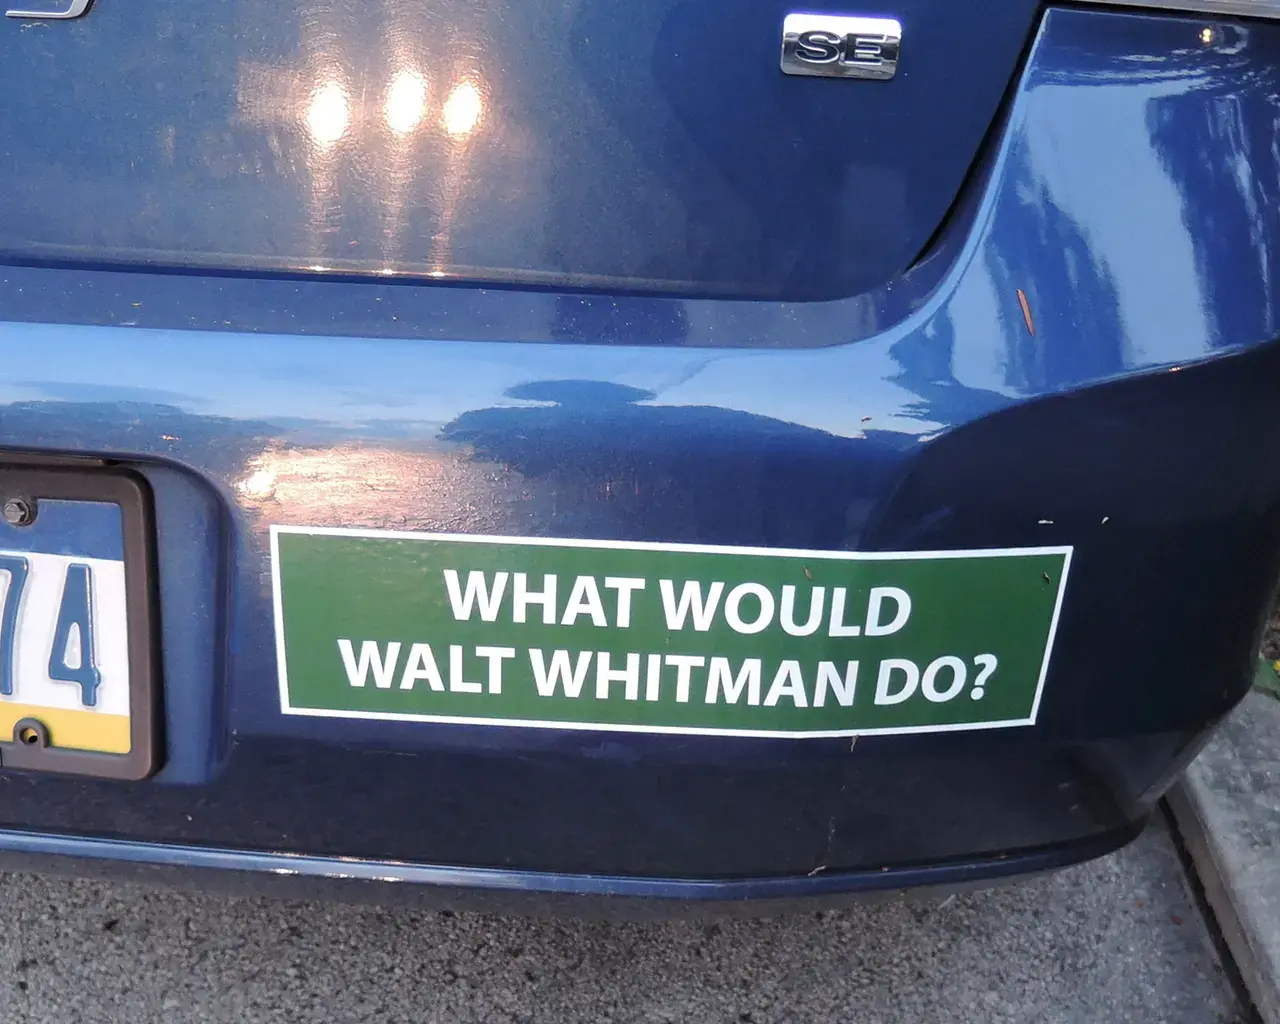 "Whitman at 200: Art and Democracy,"&nbsp;Blue Earth Review, “What Would Walt Whitman Do?,” 2016, bumper sticker. Photo by Lynne Farrington.